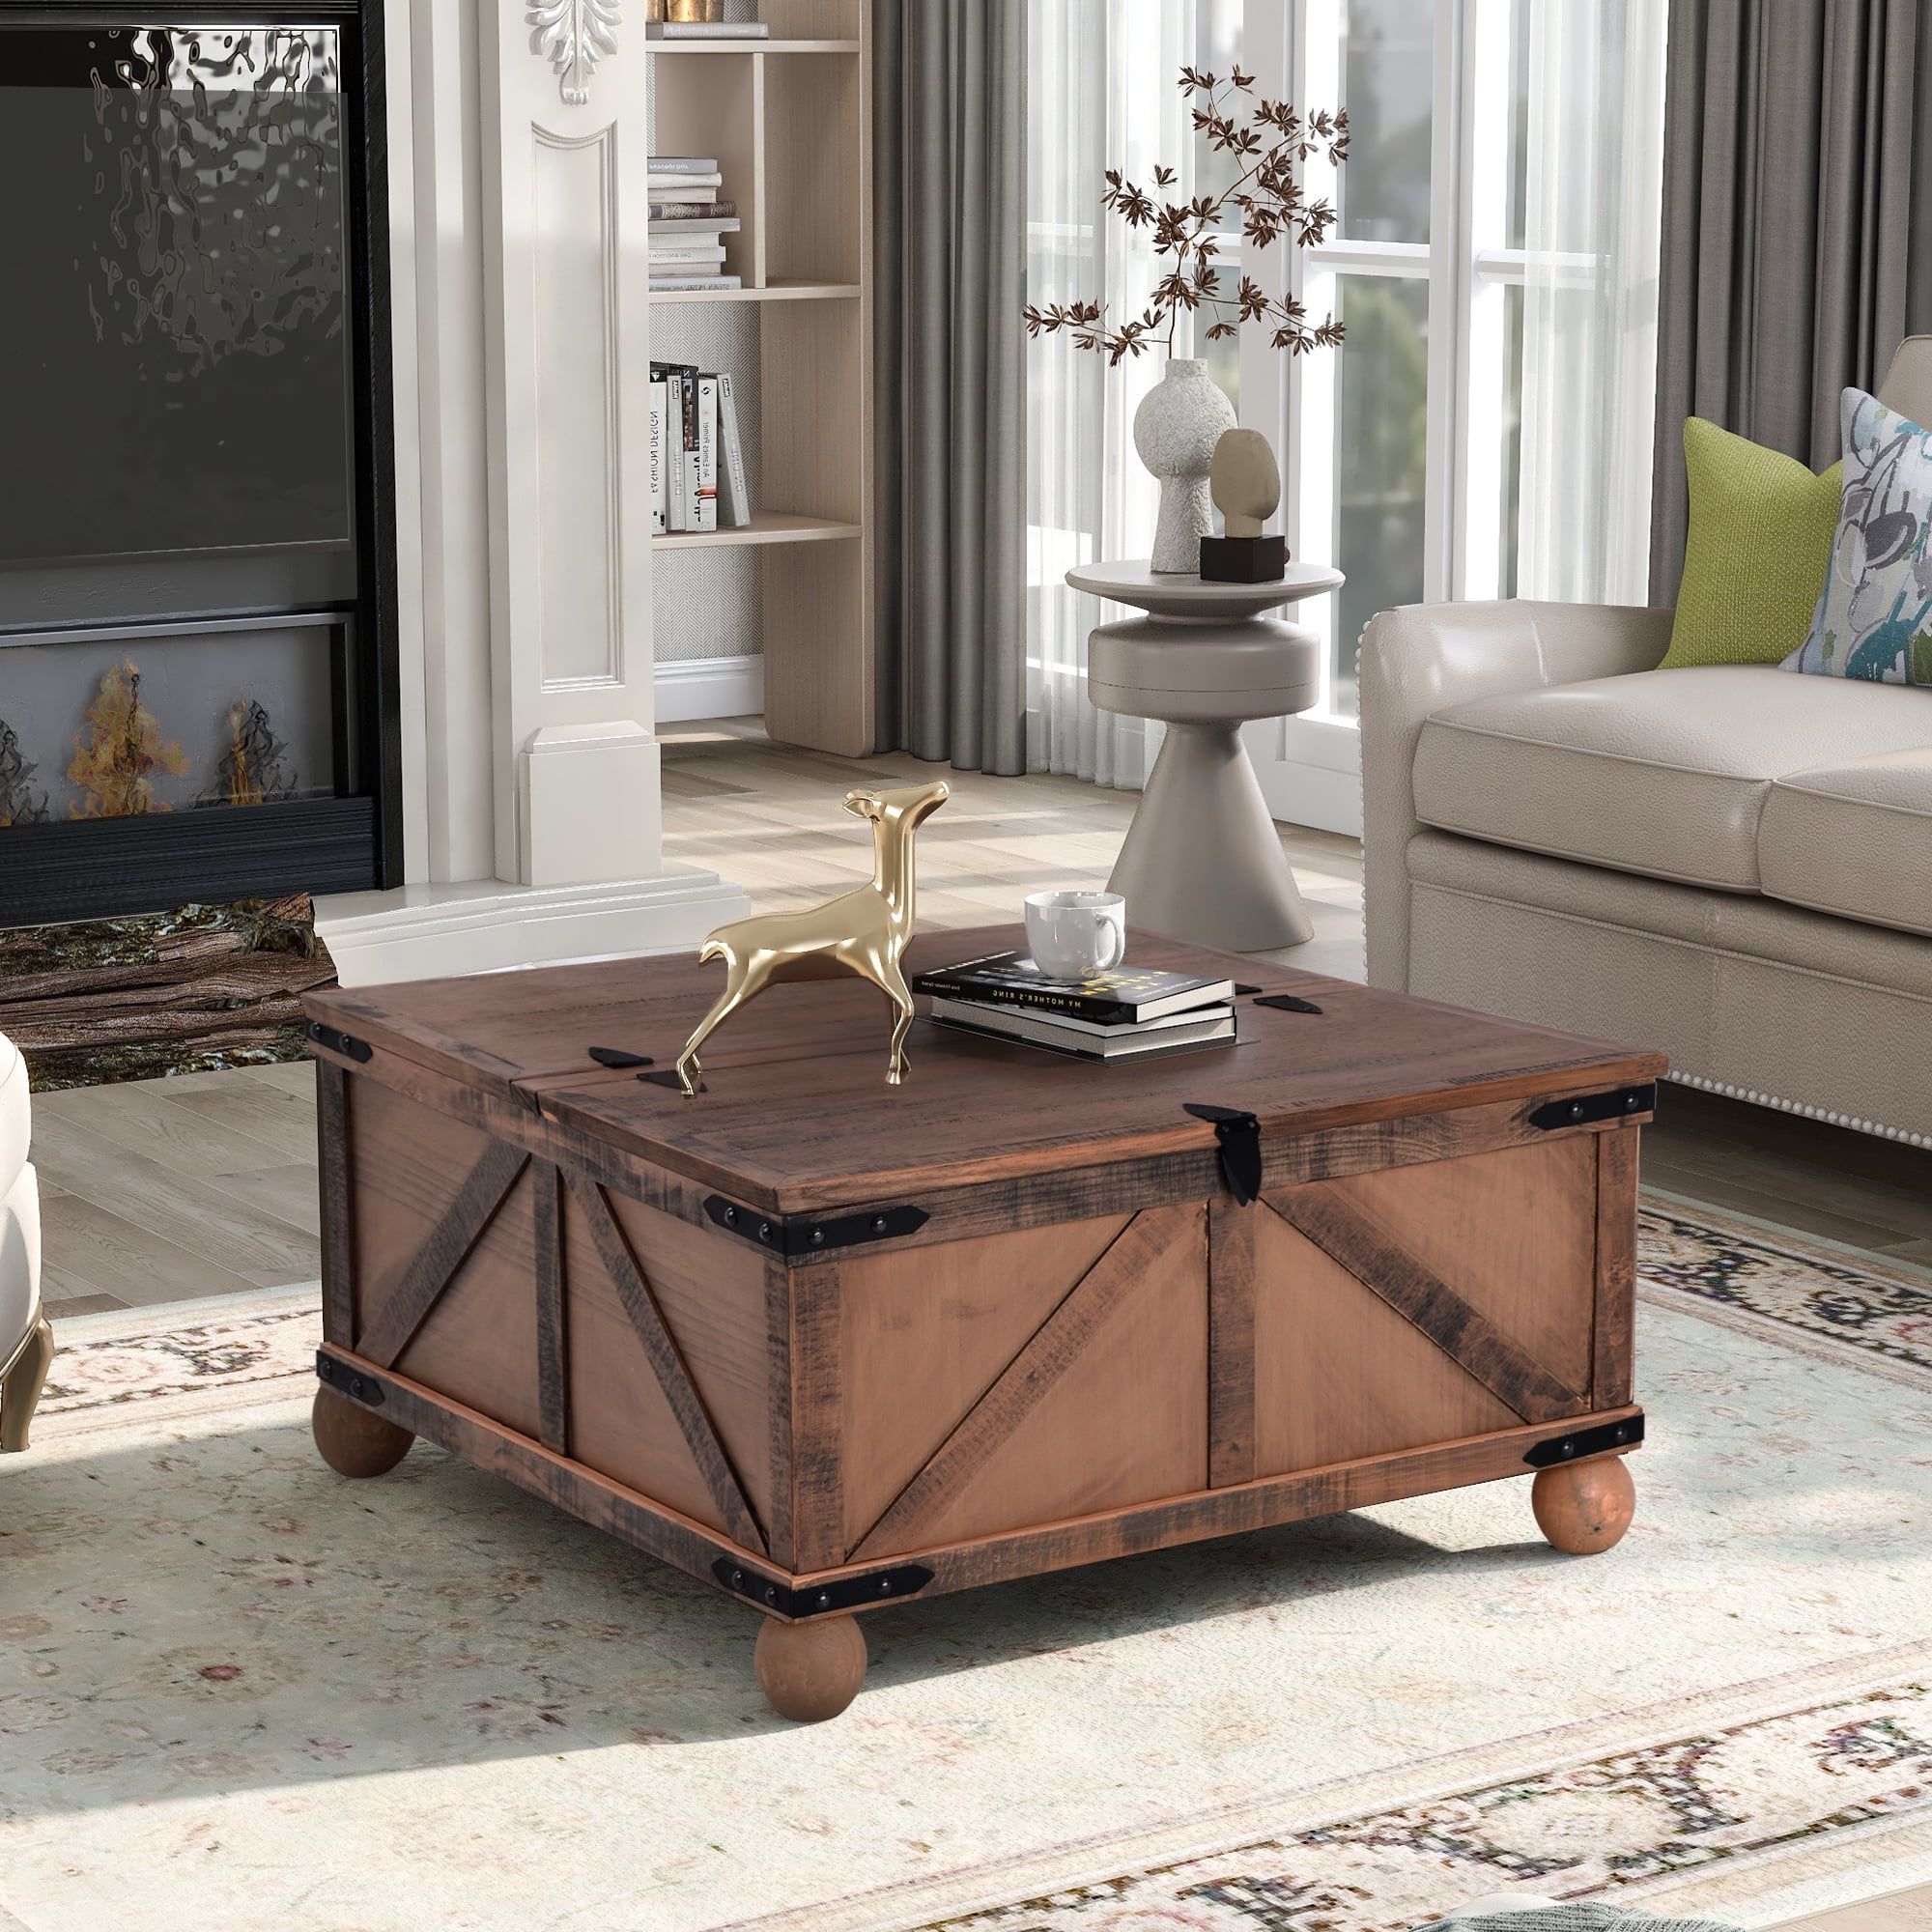 Farmhouse Square Coffee Table With Lift Top For Storage, Brown Throughout Well Known Farmhouse Lift Top Tables (View 6 of 15)